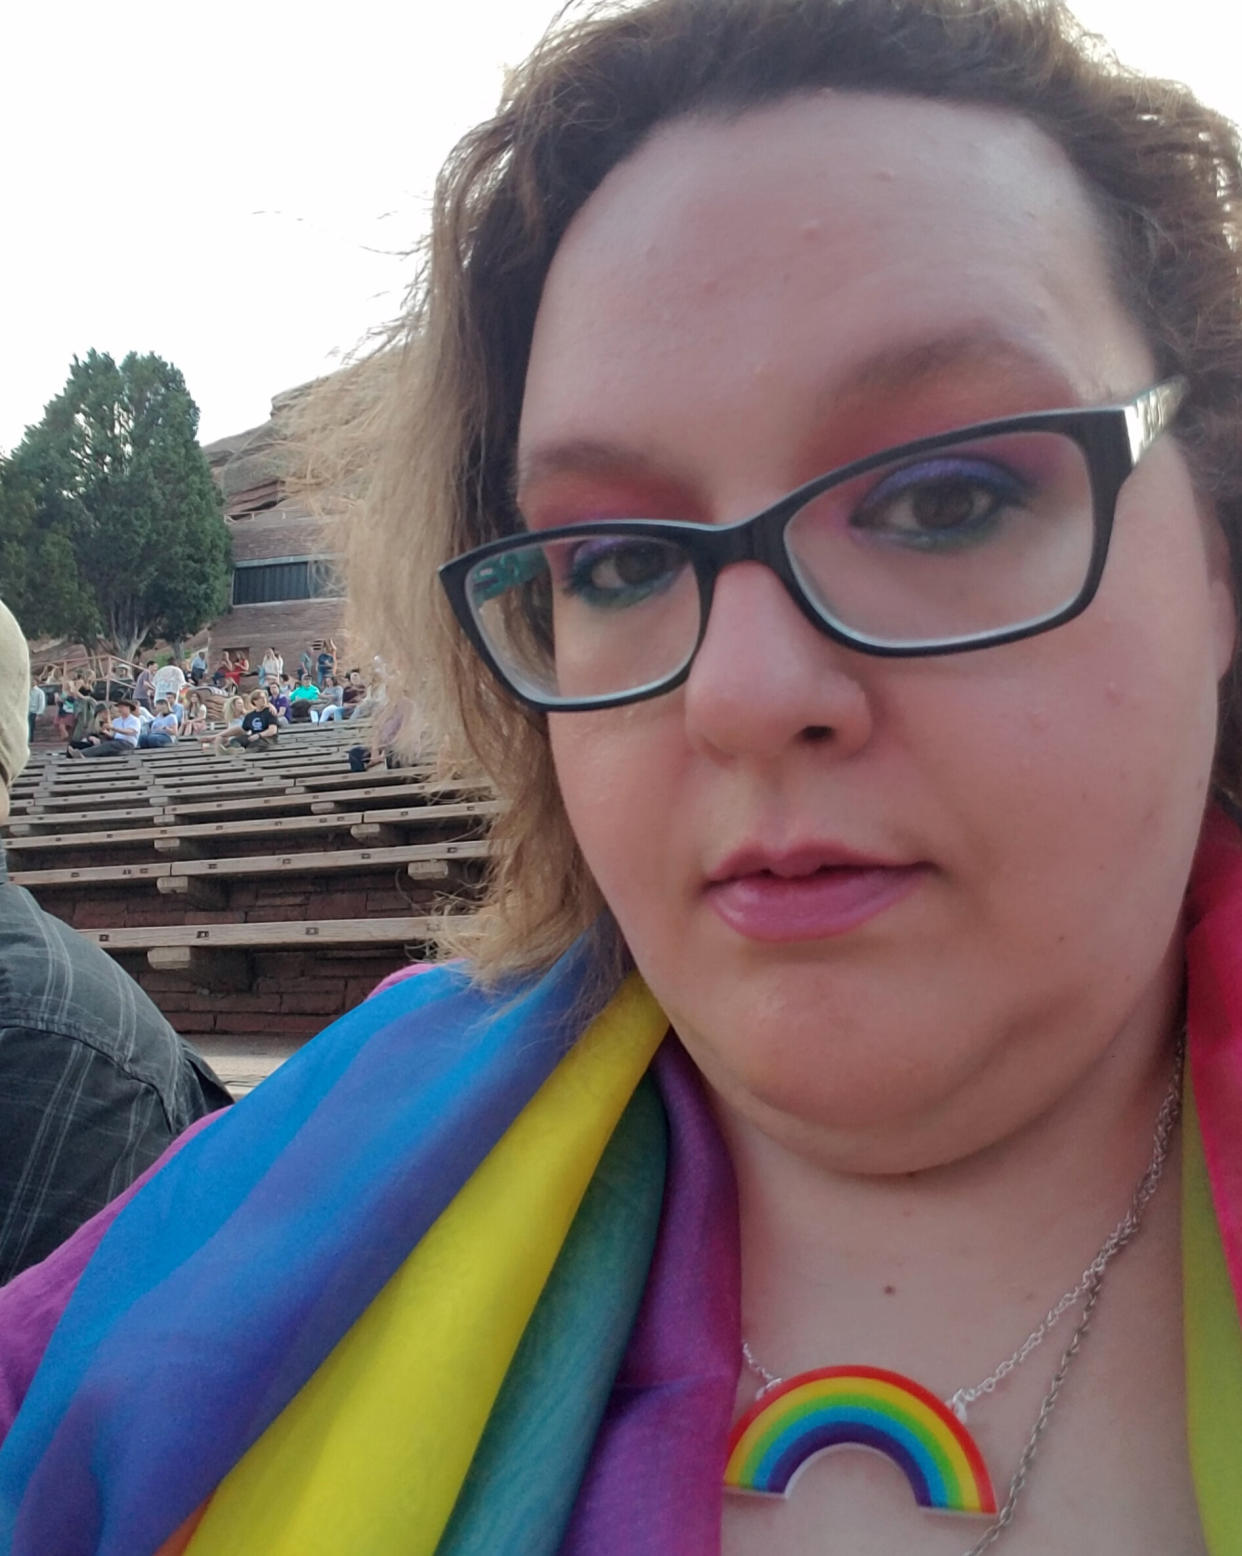 A selfie of Juliet James taken at the Kacey Musgraves show at Red Rocks Amphitheater in June 2019. (Photo: Courtesy of Juliet James)